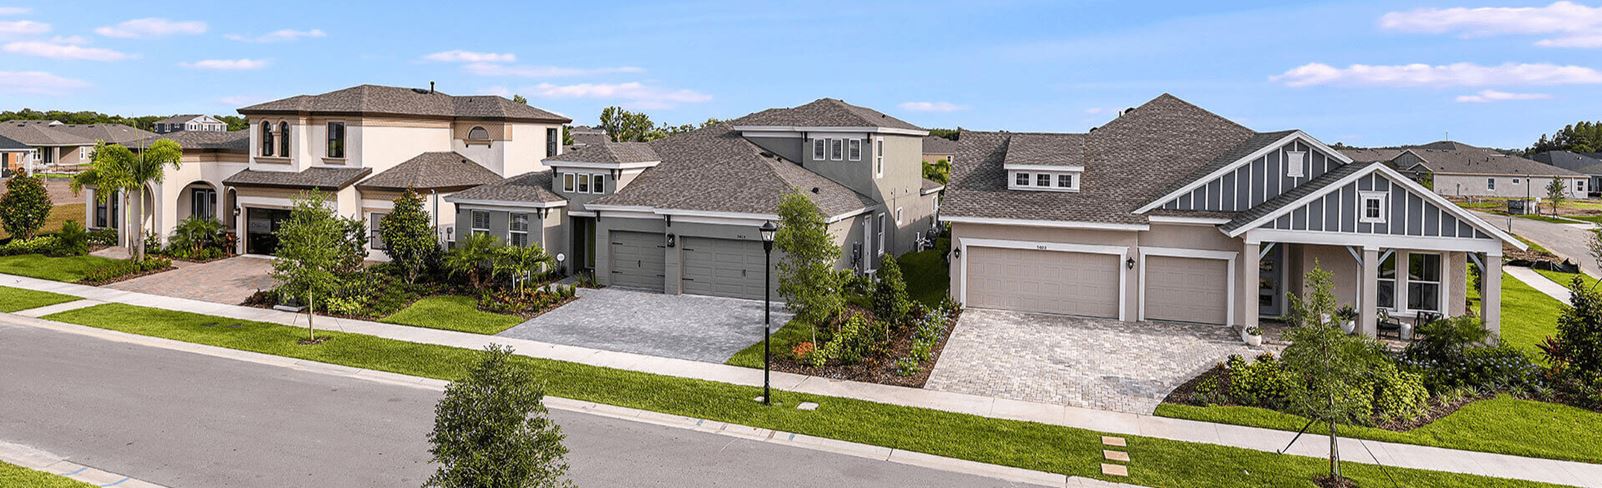 Model row in Waterset, new homes in Apollo Beach.